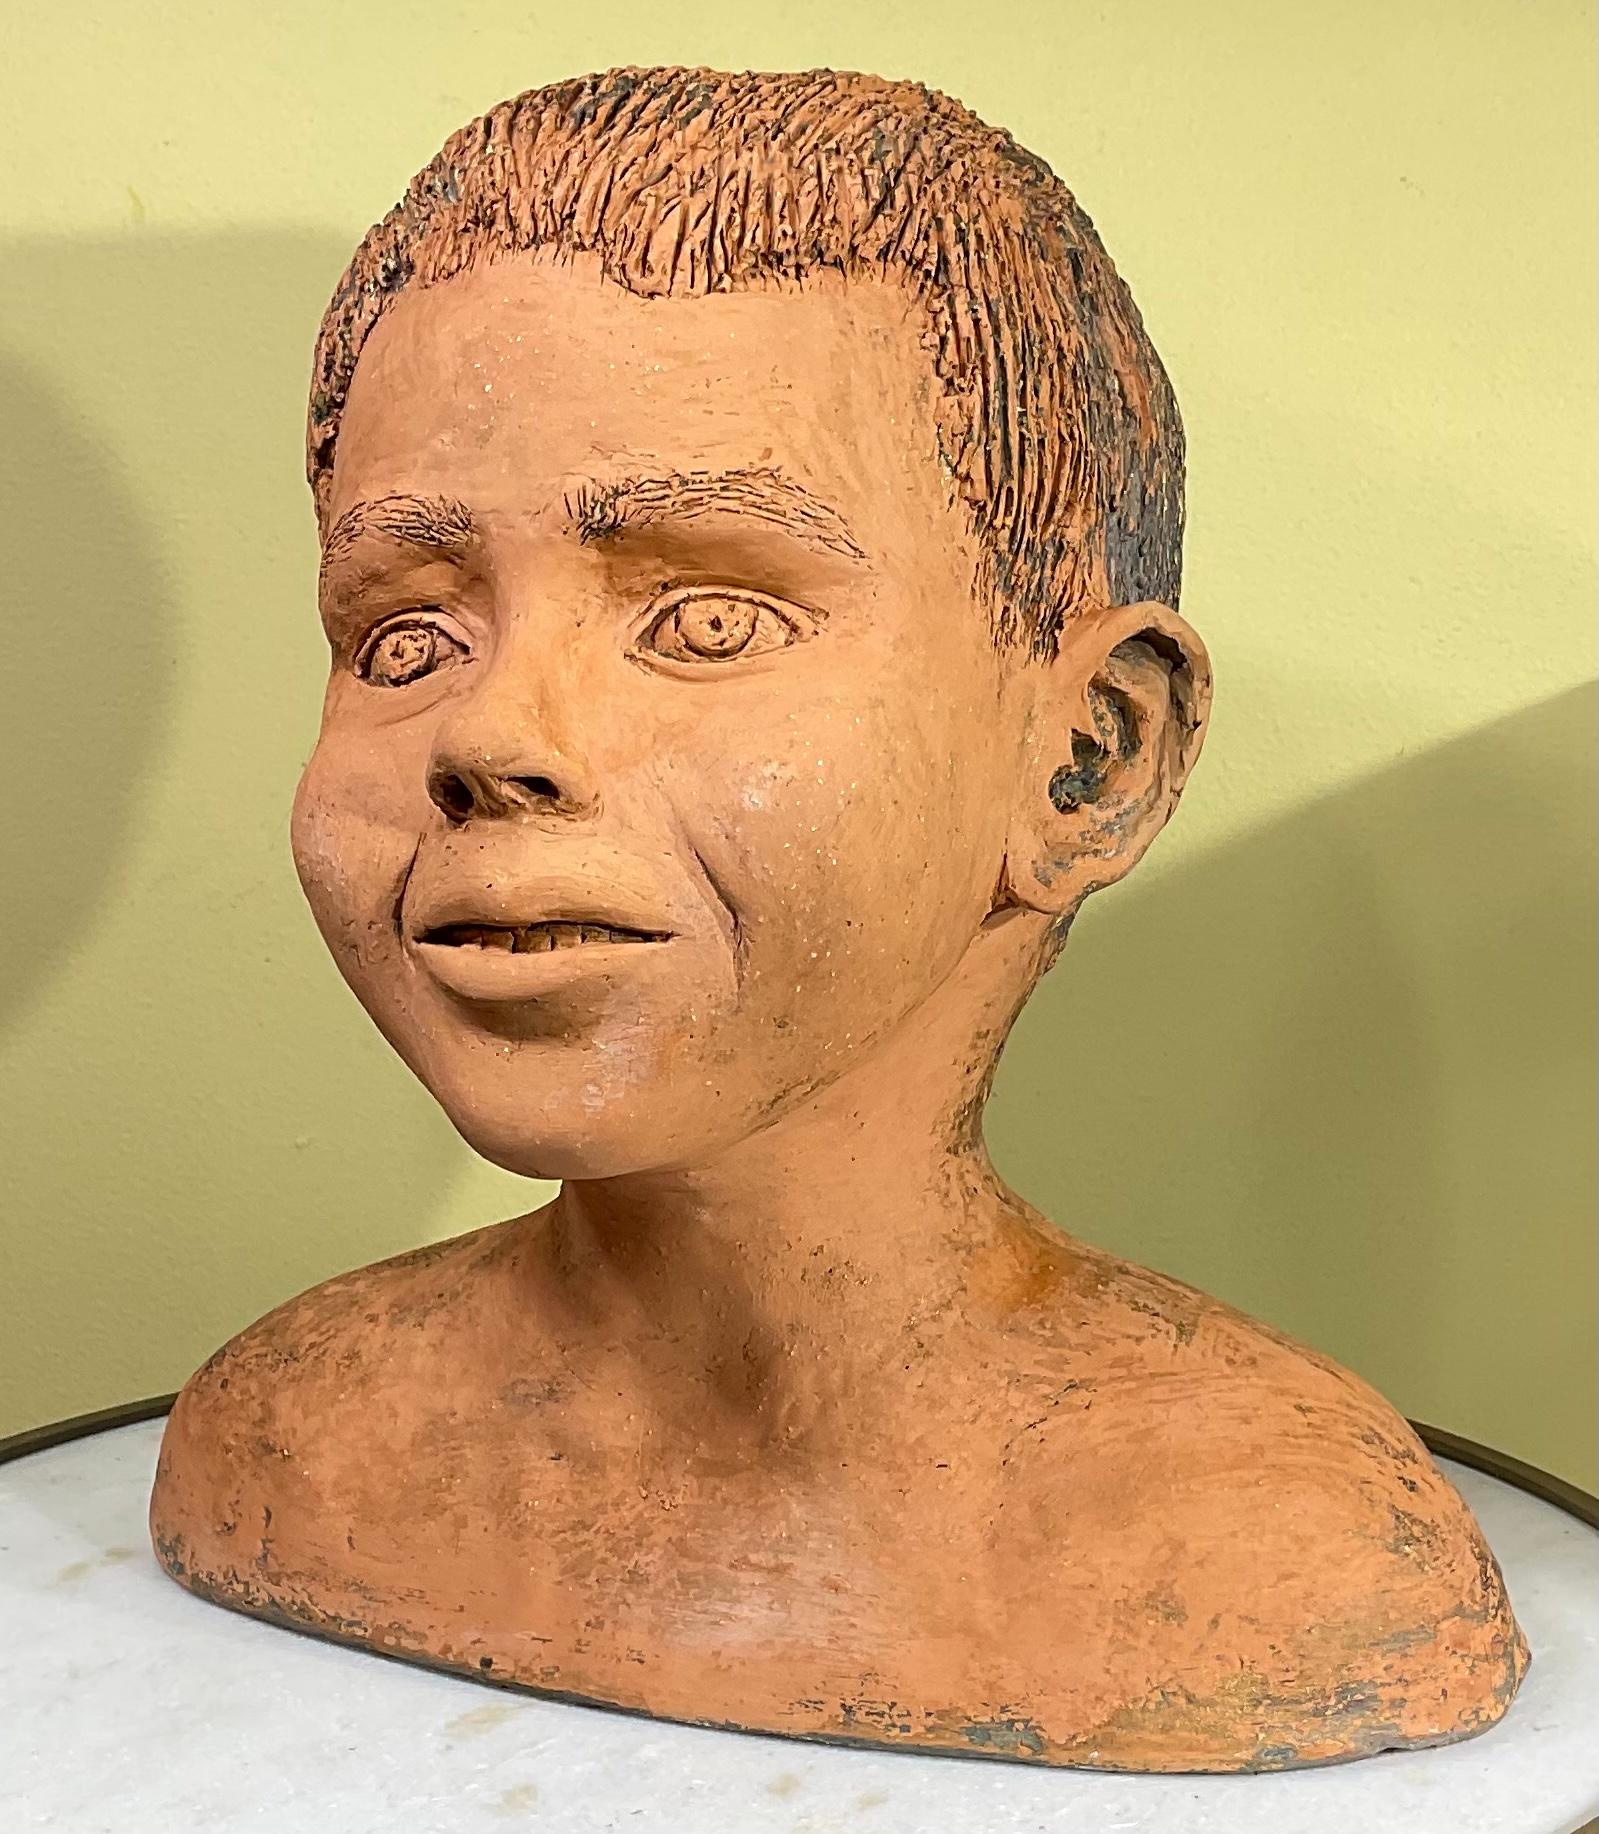 Intriguing bust of a young kid made of rustic terra-cotta, 
 great smile, innocent expression, looking forward.
Beautiful object of art from any angle.
Signed and dated MD 3/91
If anybody know anything about who is the artist please let me